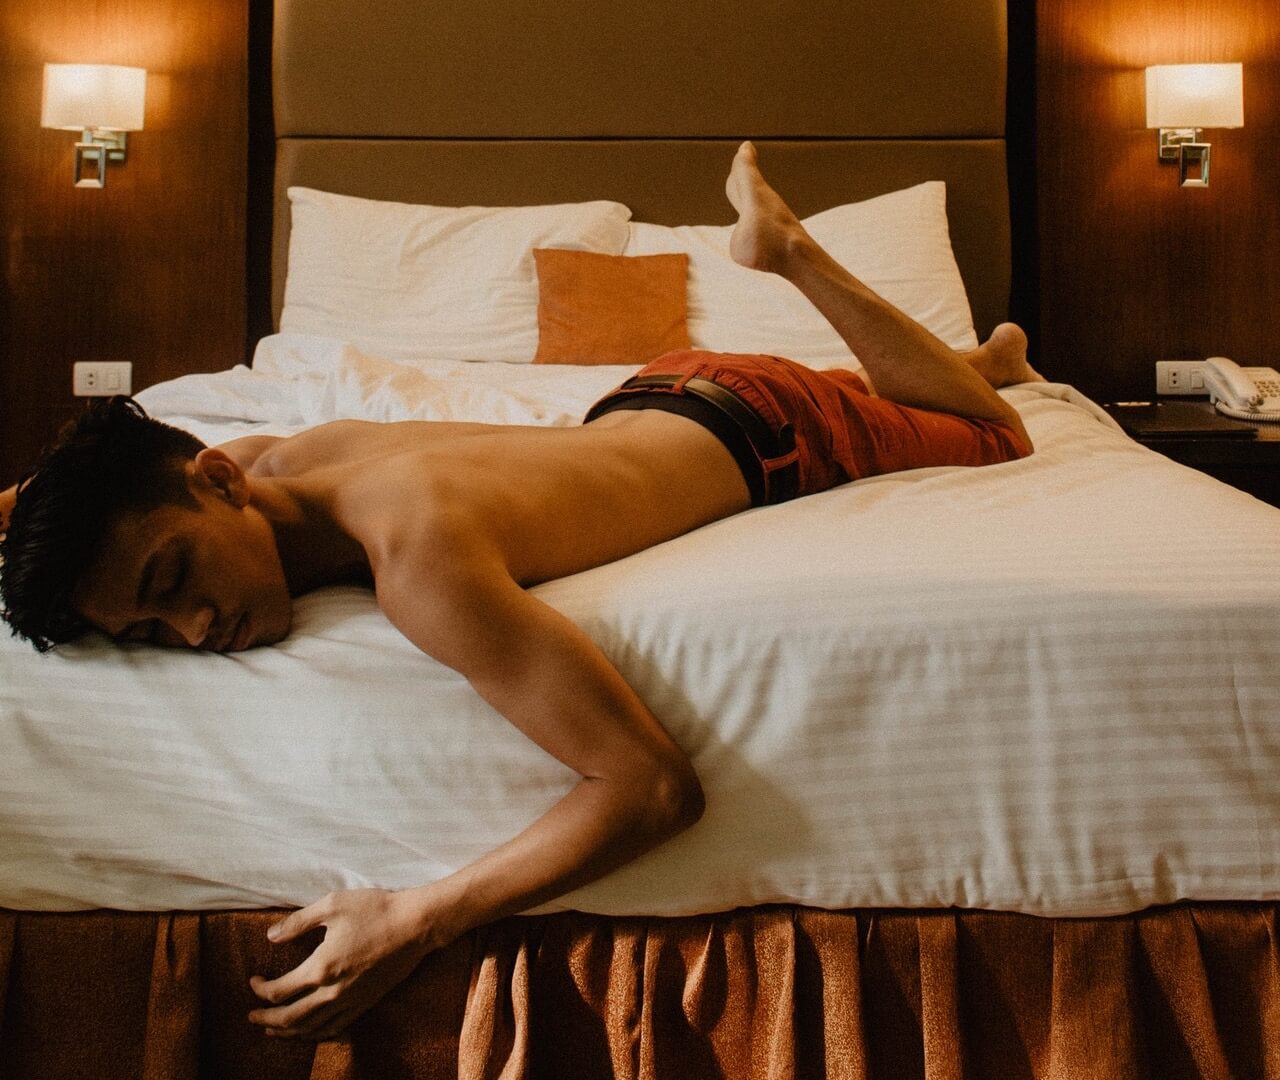 Shirtless man laying on bed with closed eyes